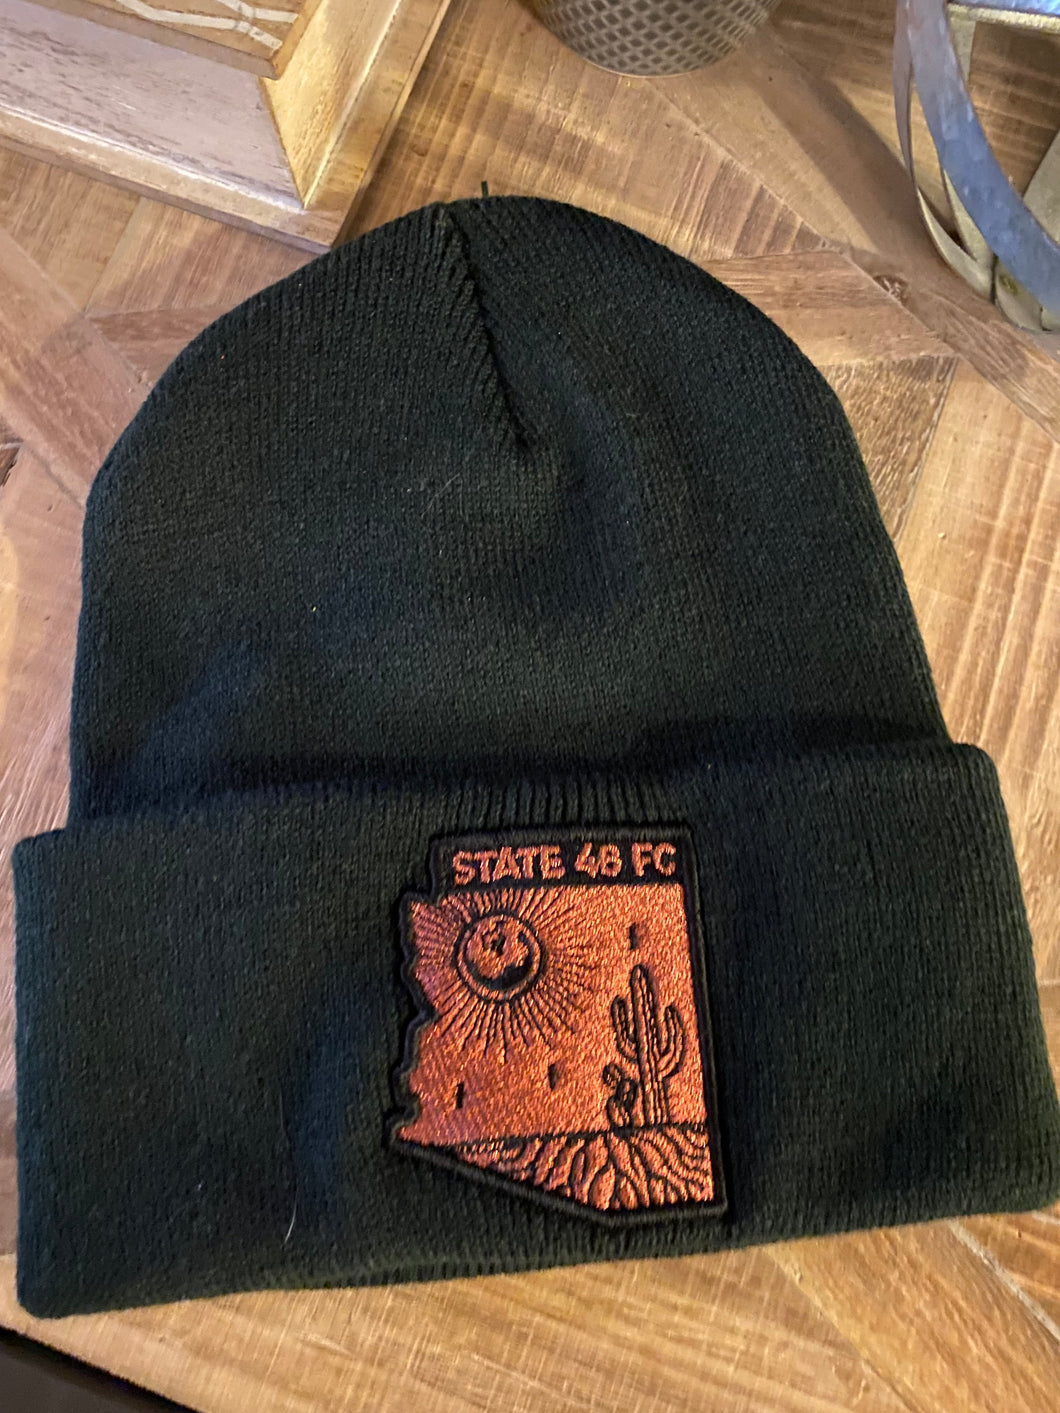 State 48 FC Beanies